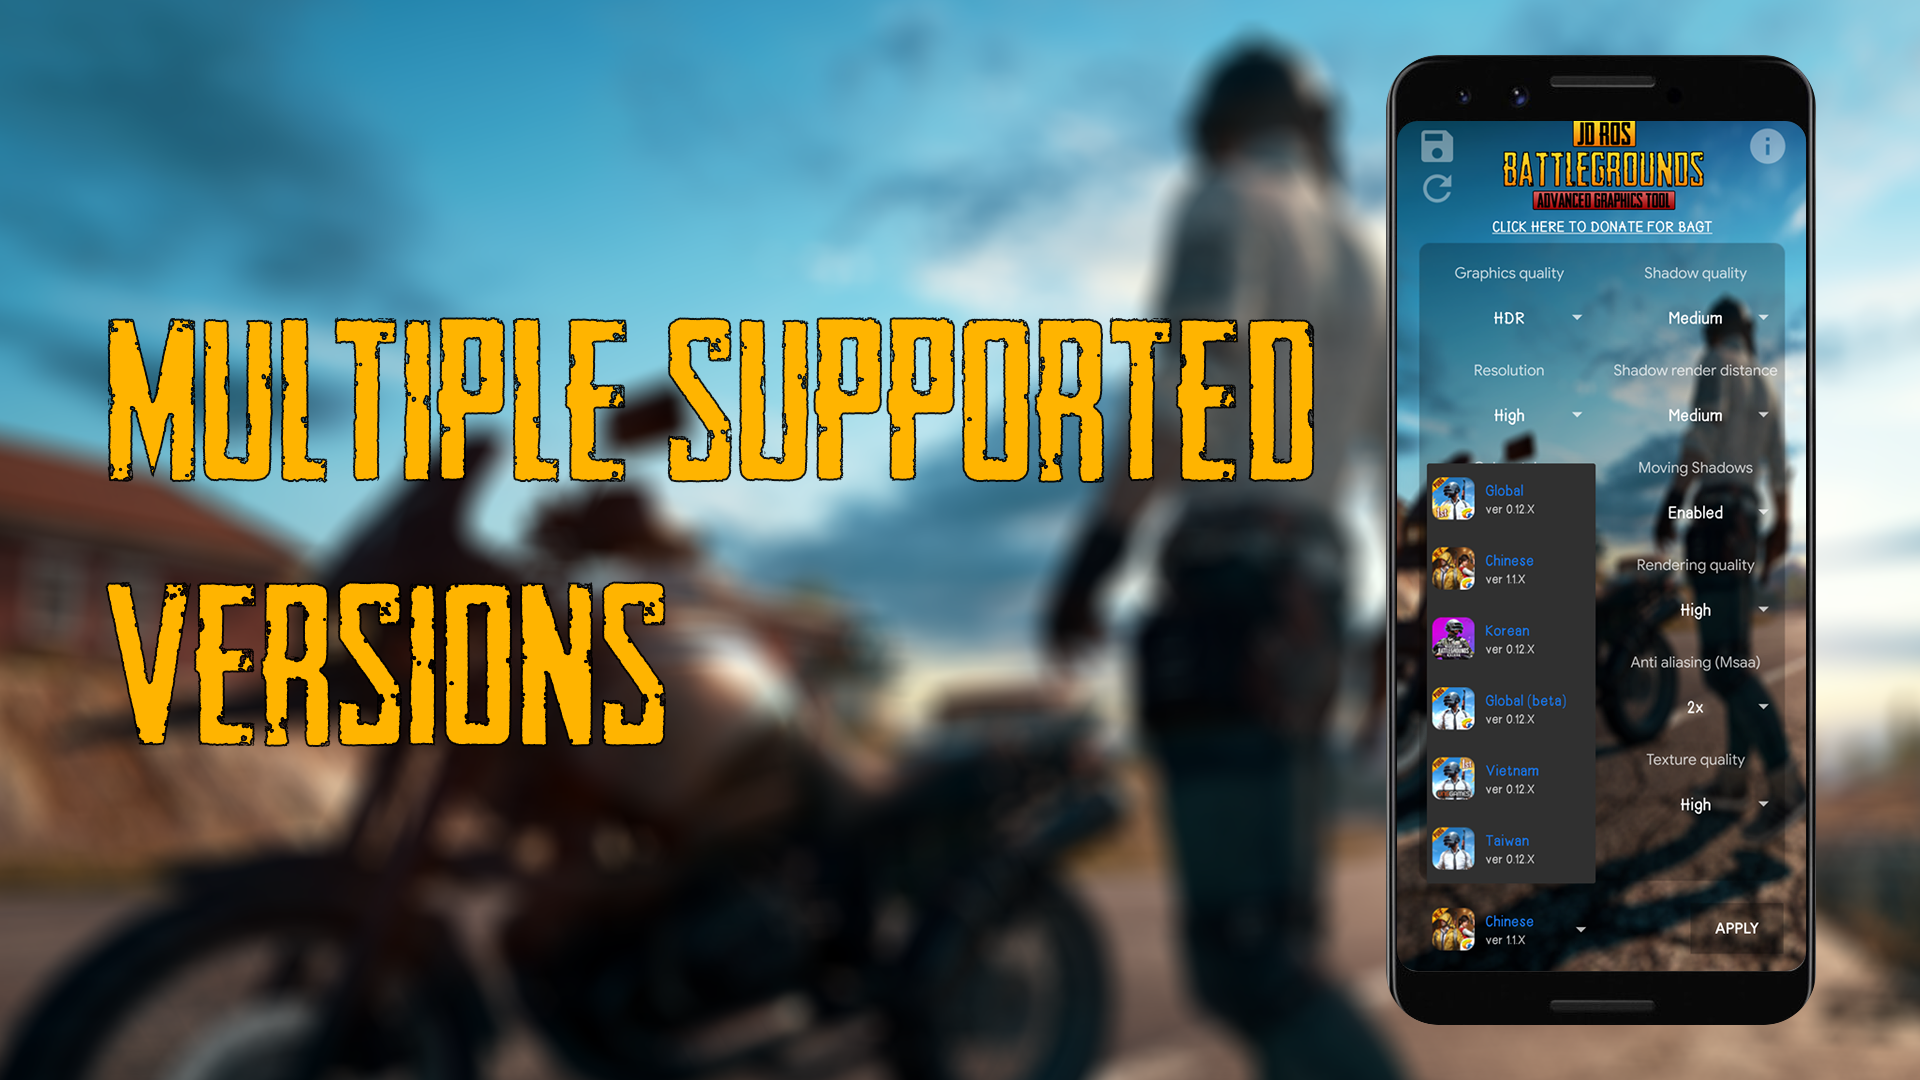 Battlegrounds Advanced Graphics Tool [NO BAN] for Android ... - 